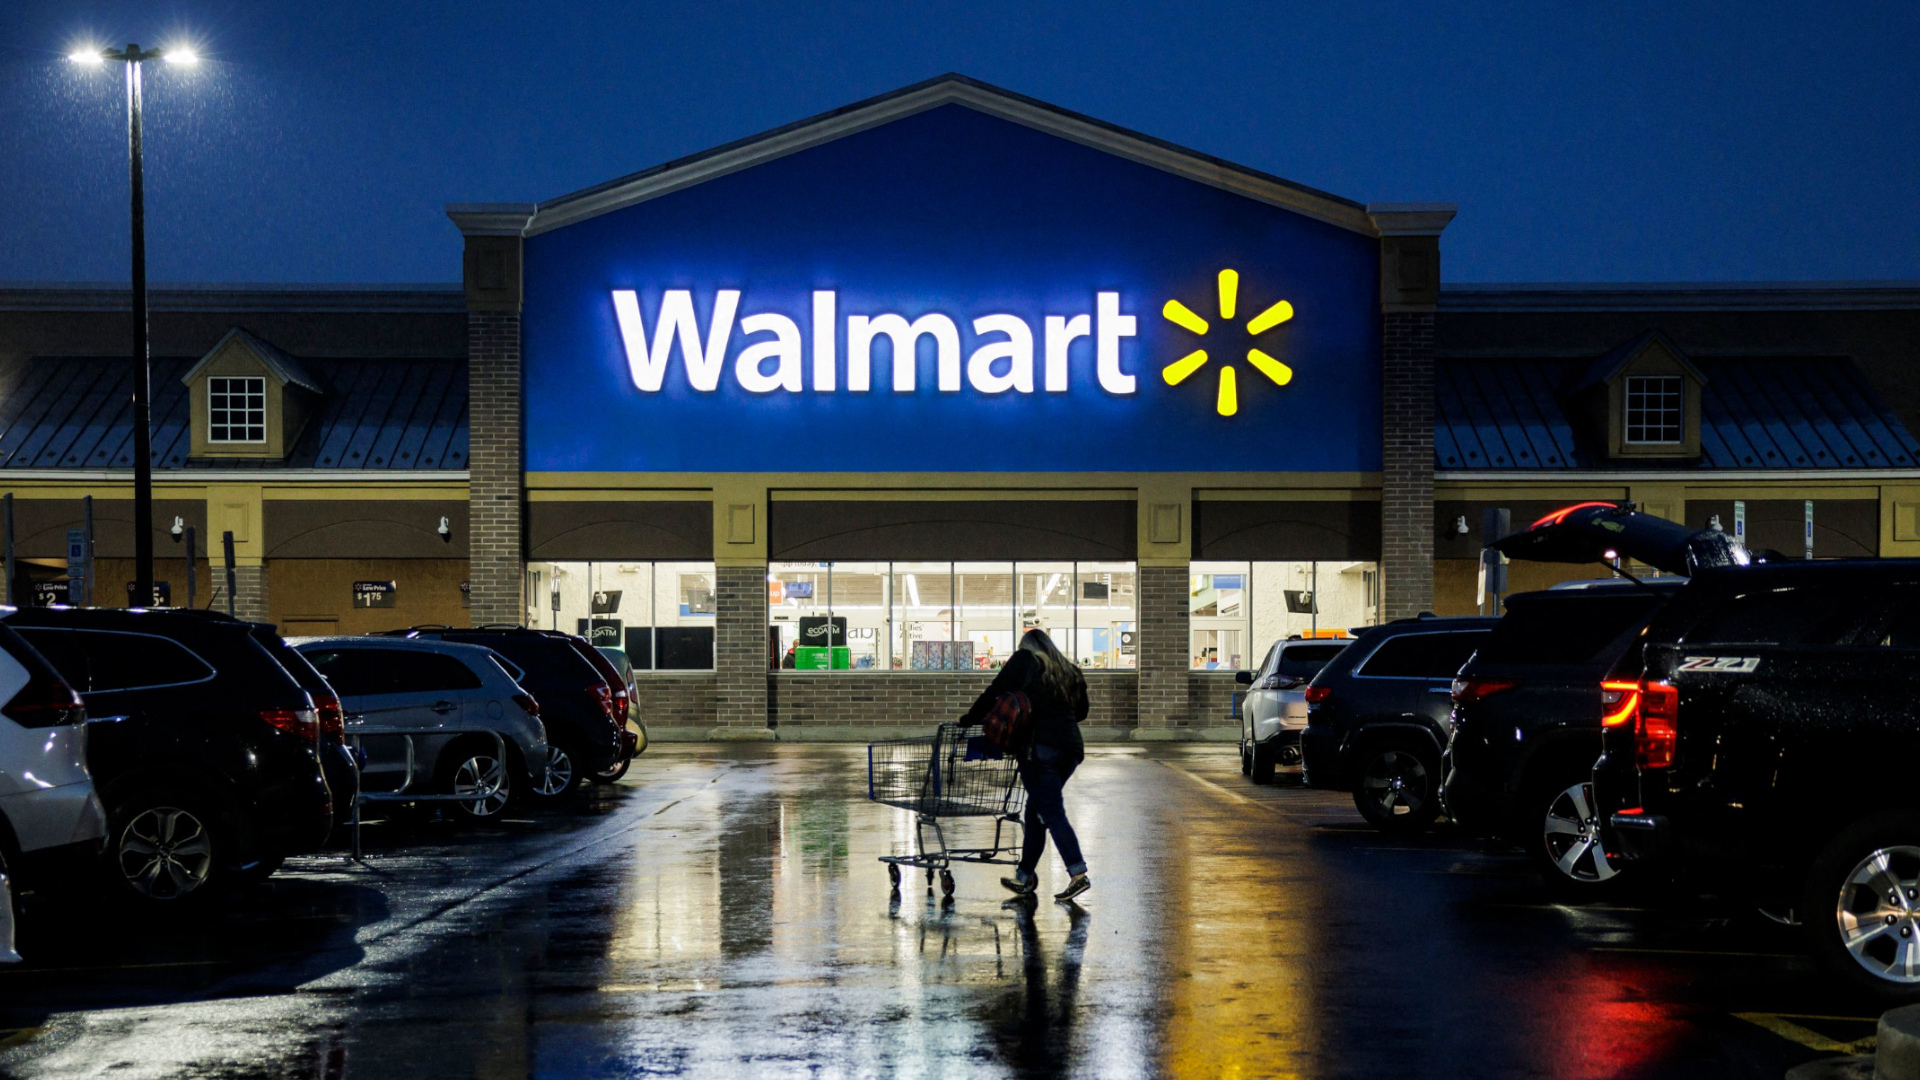 Walmart to Install EV Chargers at Thousands of Stores by 2030